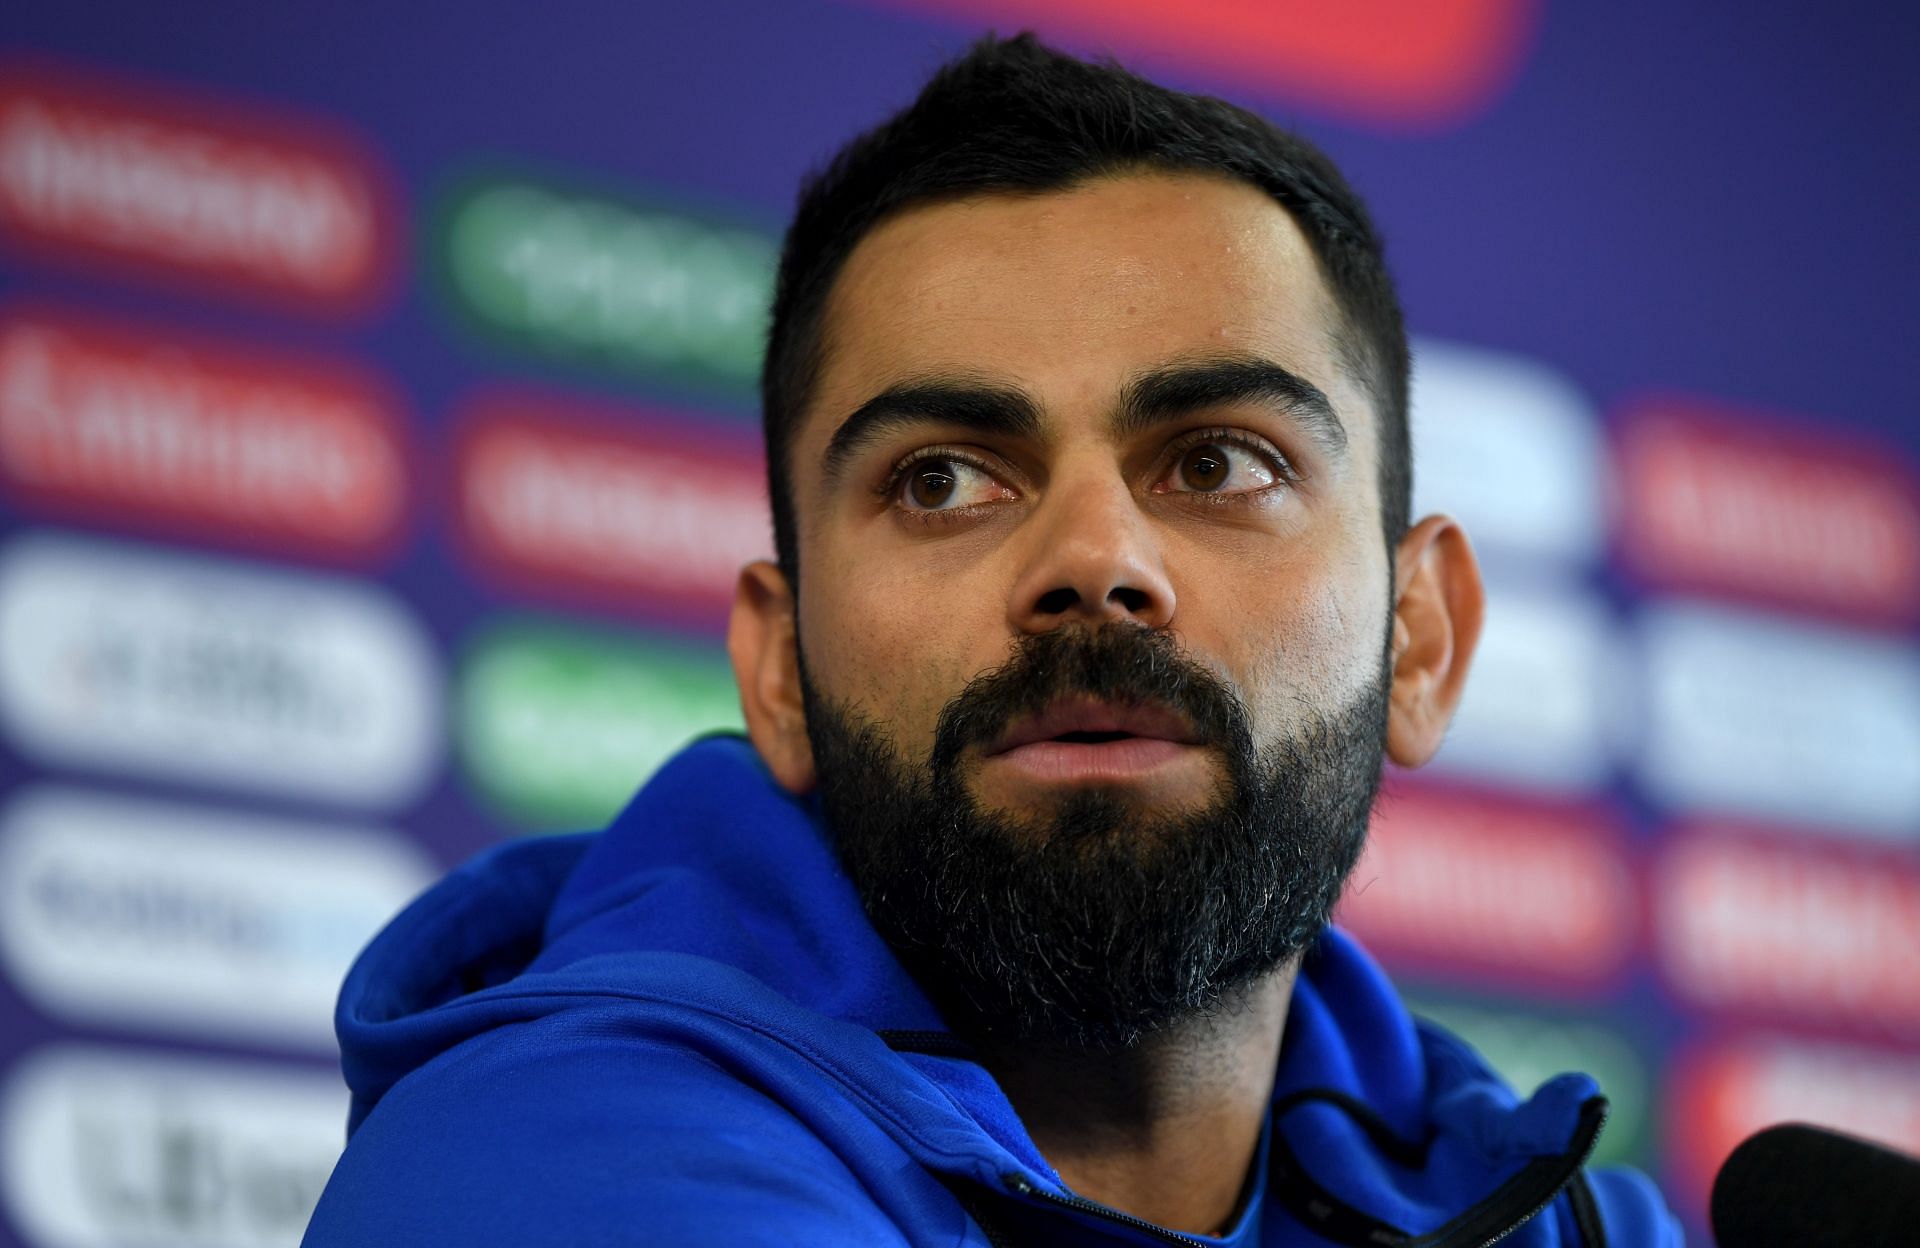 Virat Kohli had a recent run-in with the BCCI